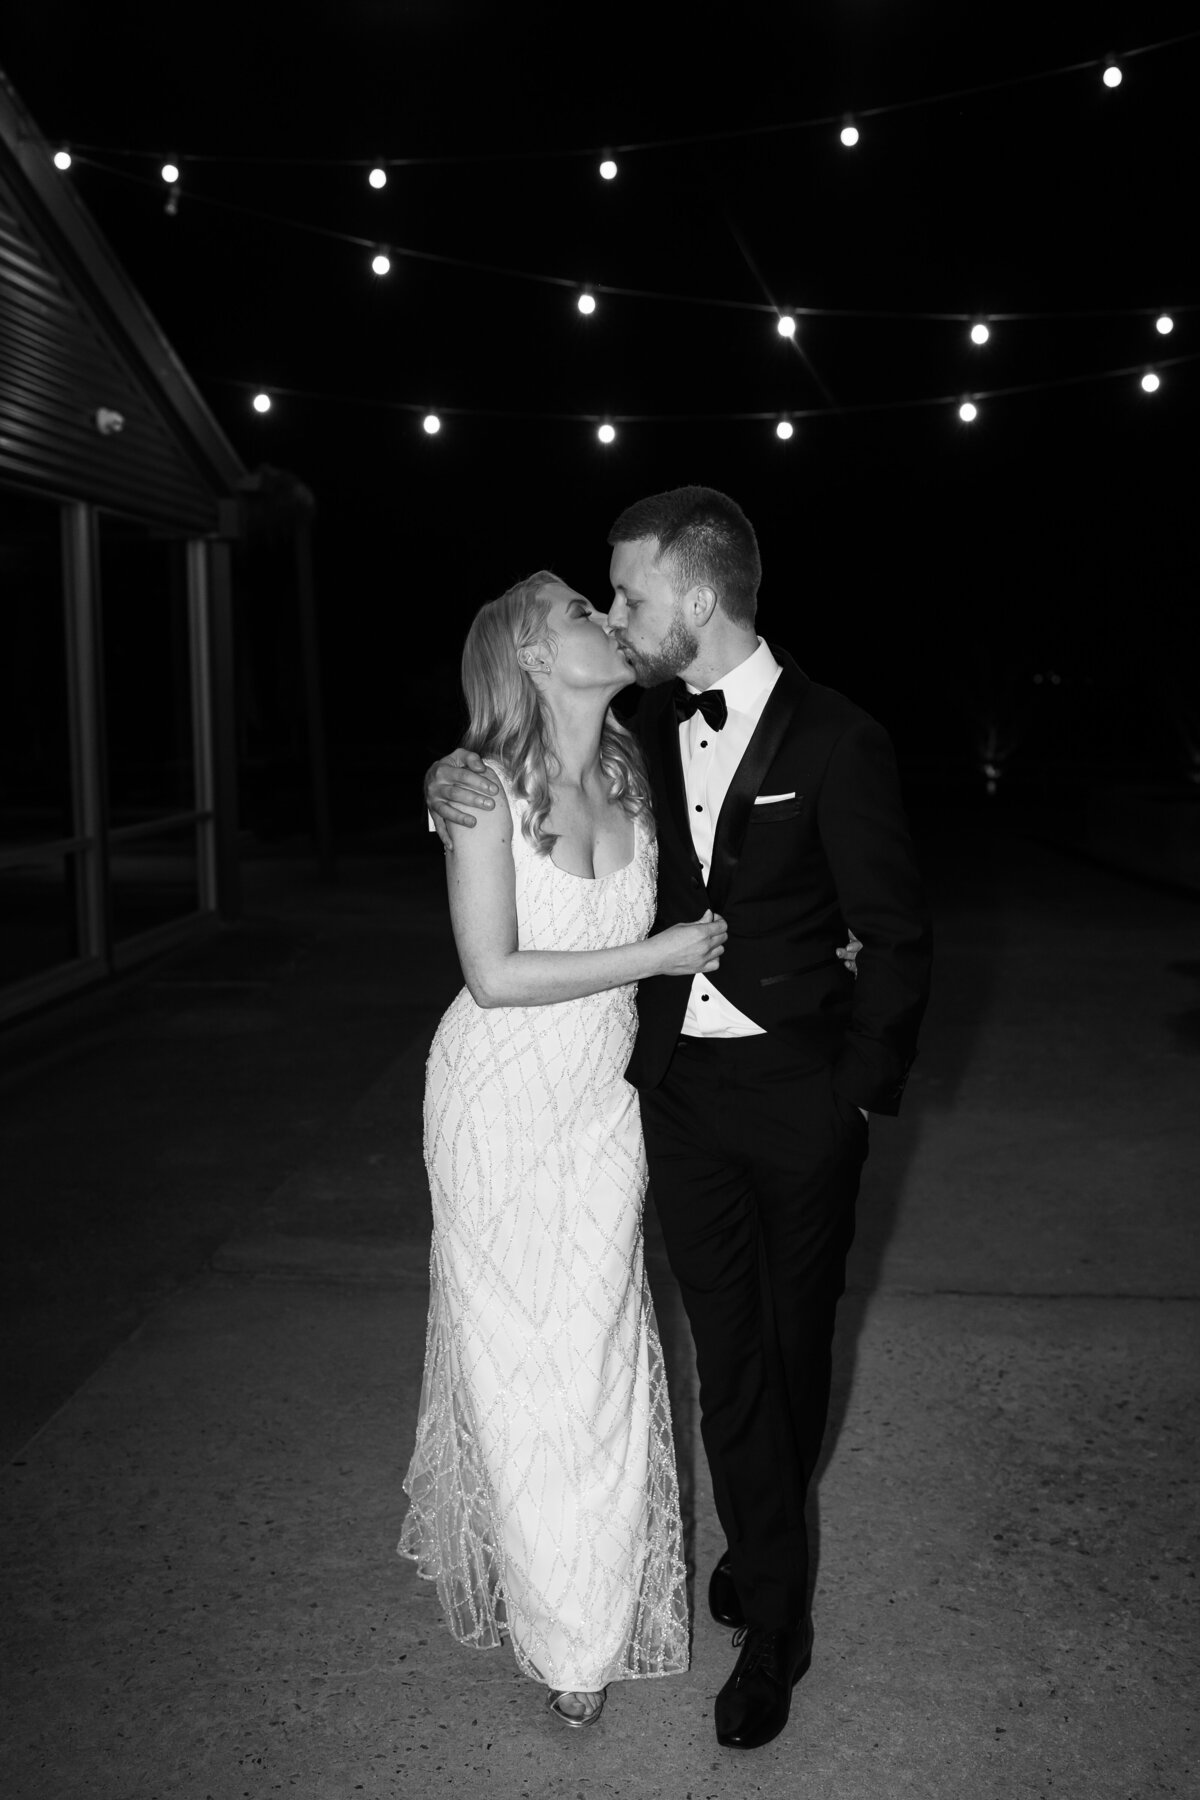 Yarra Valley Wedding at Zonzo Estate with bride and groom kissing as that walk towards me with arms around each other and in the dark with flash photography